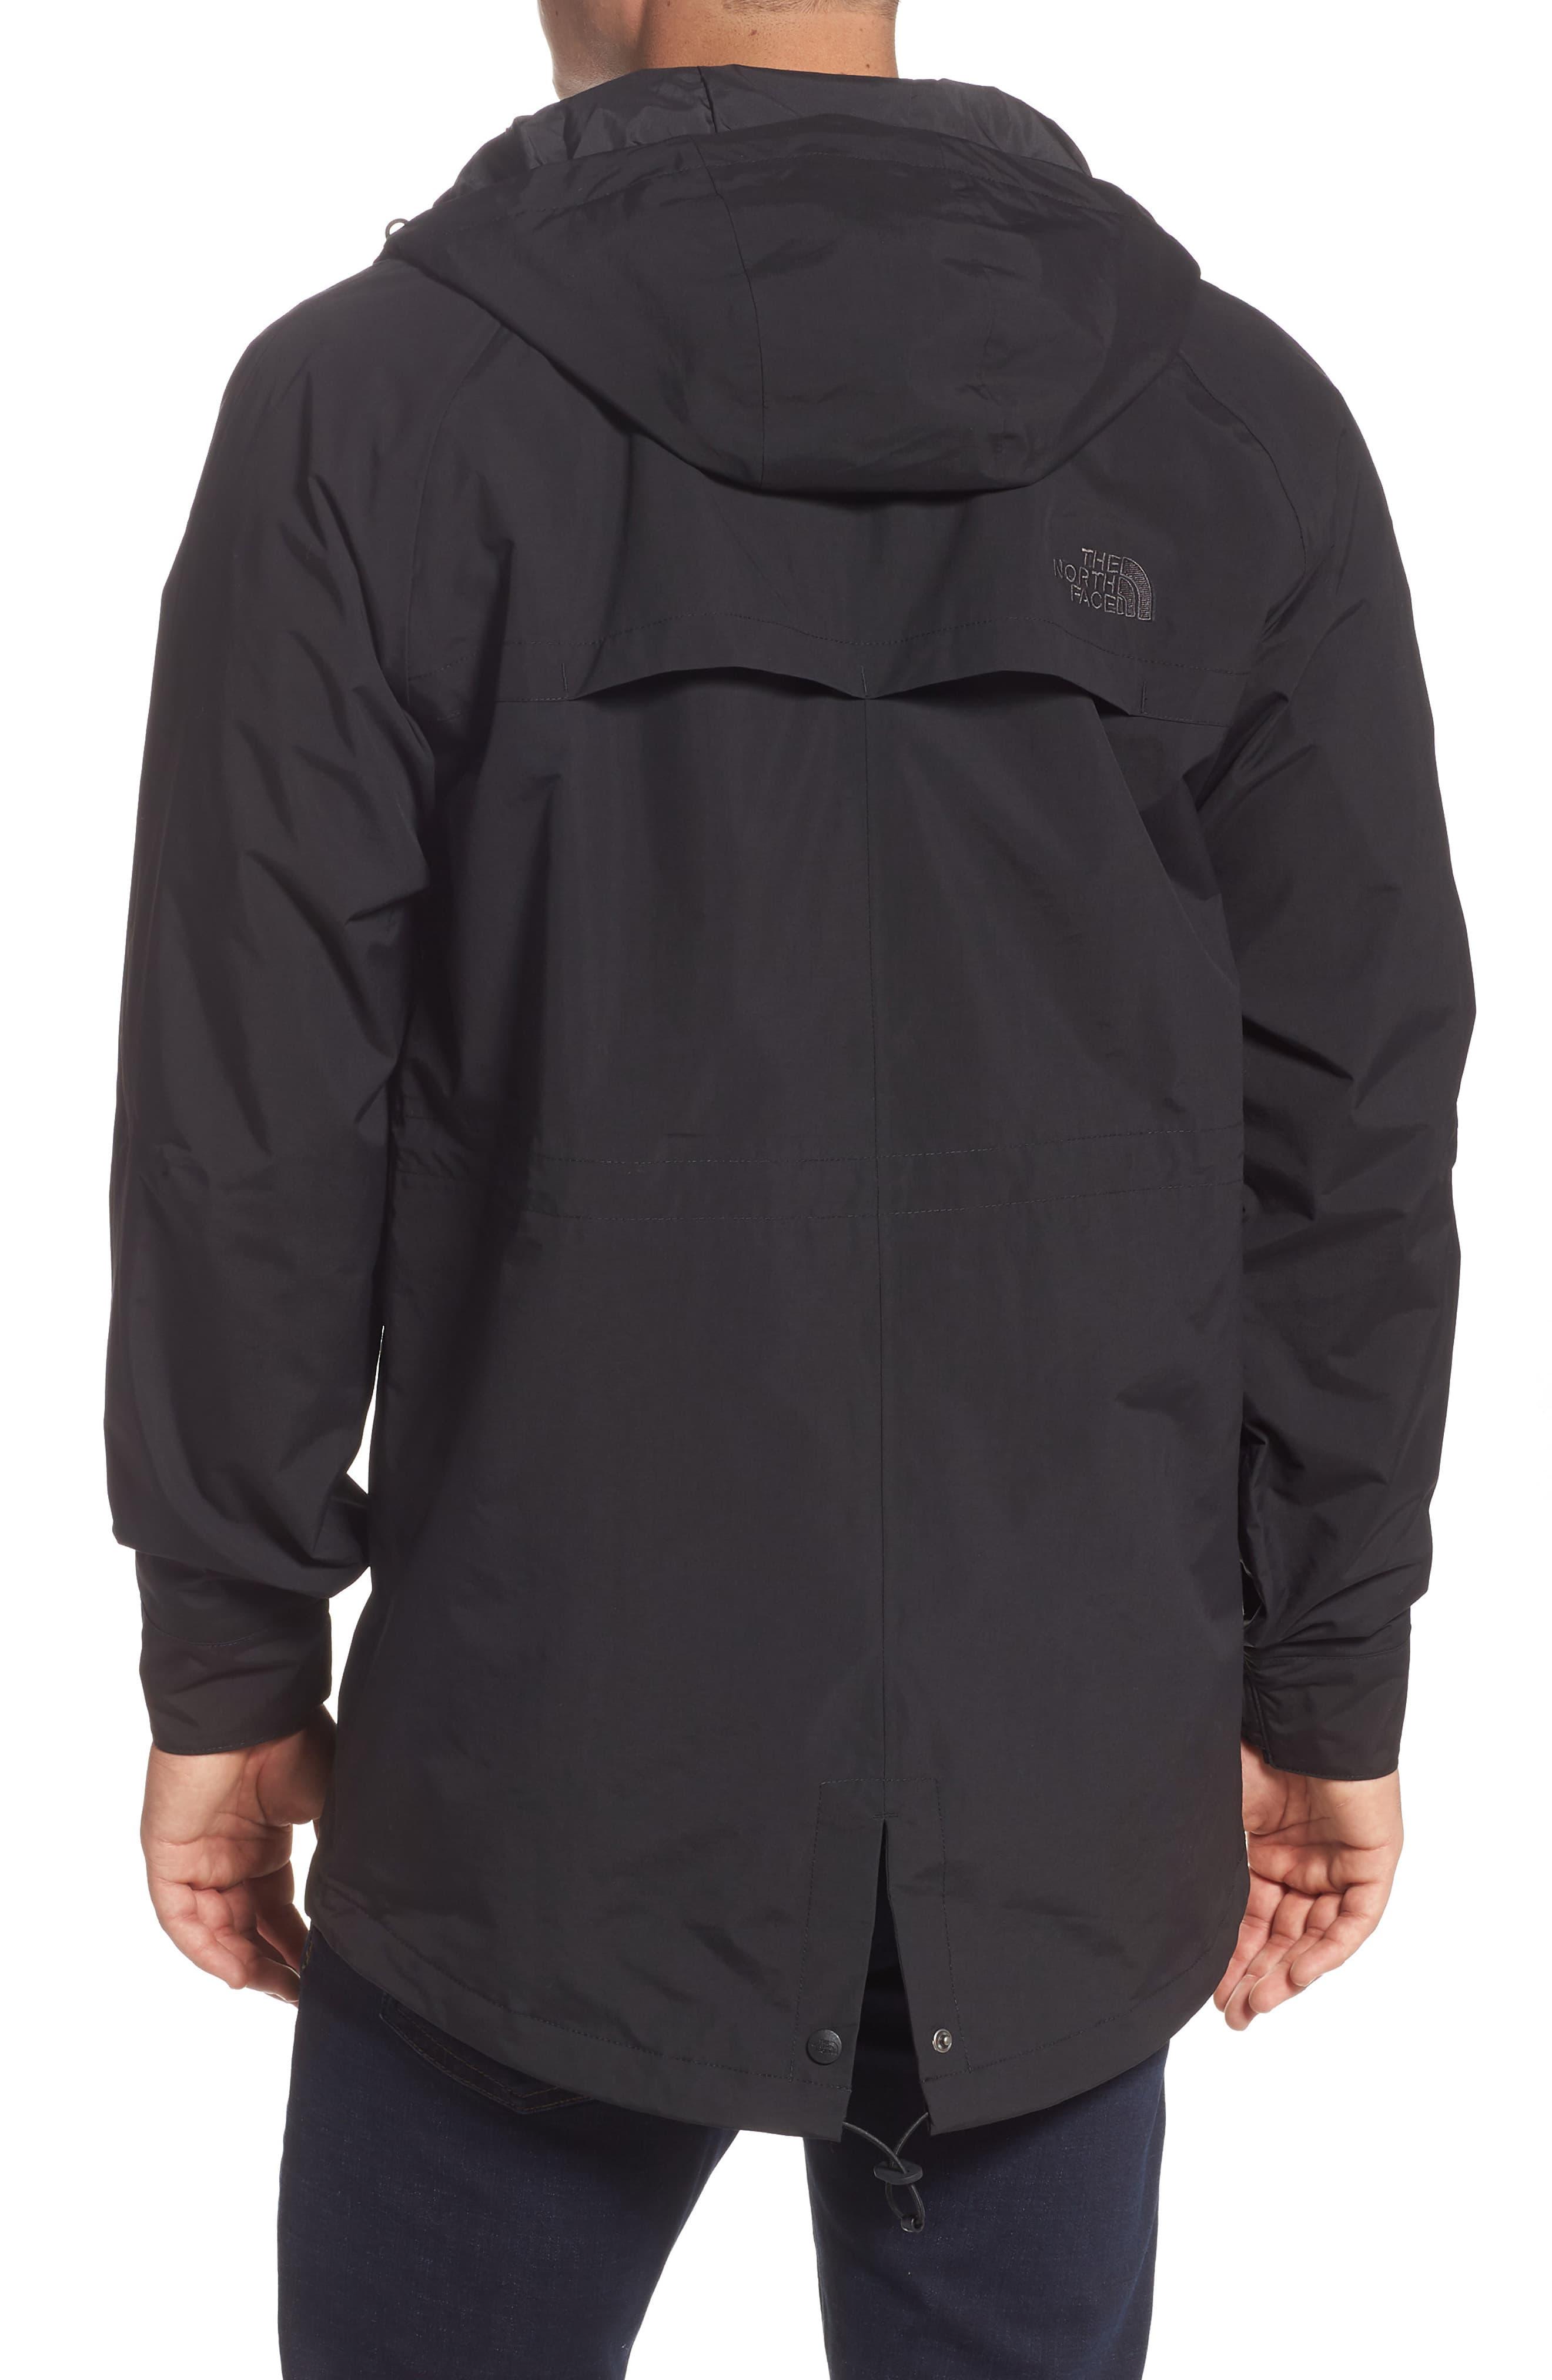 The North Face Synthetic City Breeze Rain Parka in Black for Men - Lyst